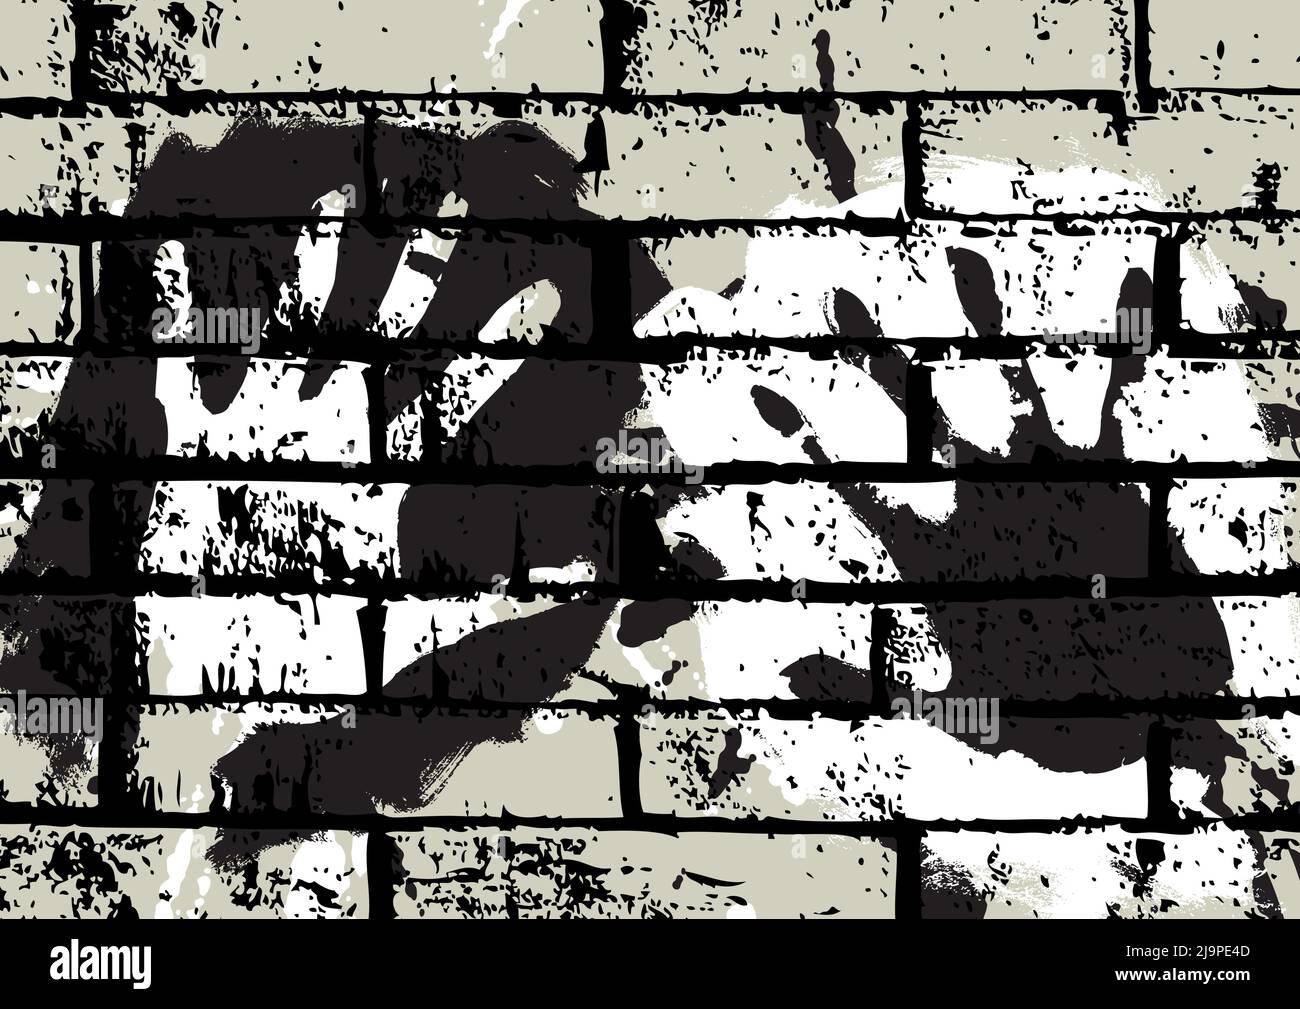 Hands on the wall, background vector illustration Stock Vector Image ...